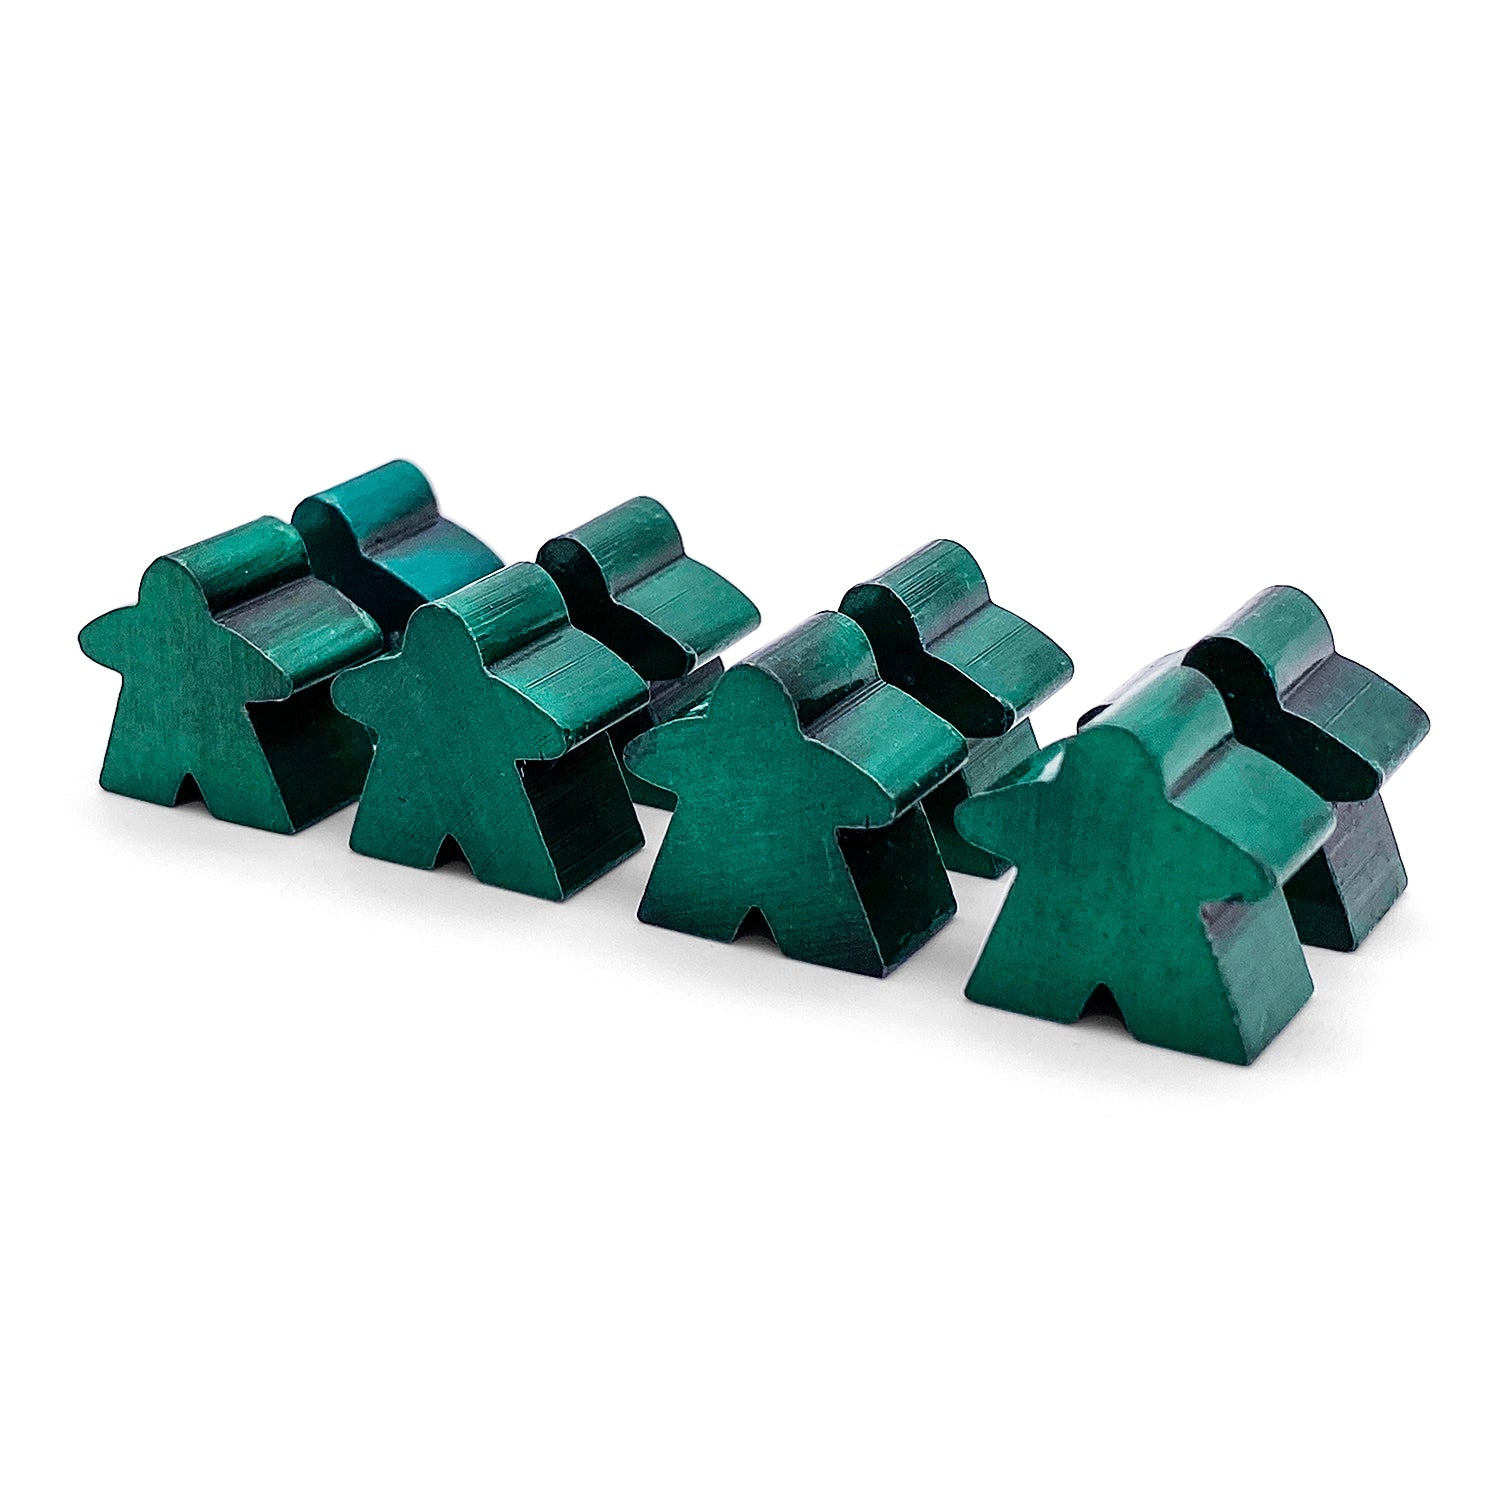 8 Pack of Green Enamel Meeples by Norse Foundry